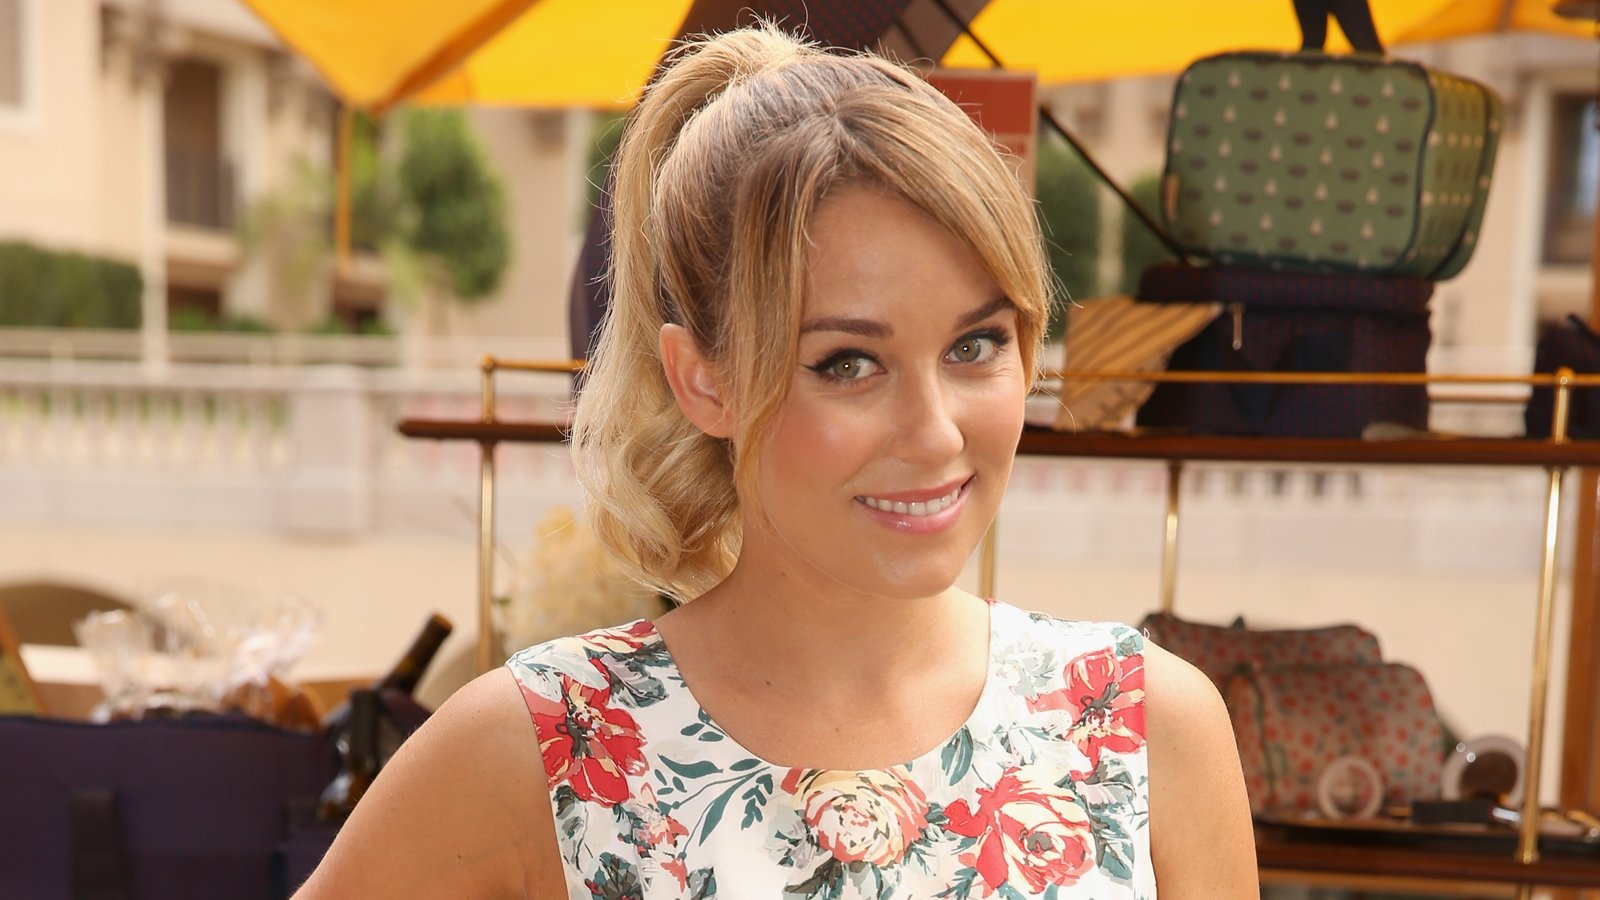 Lauren Conrad and William Tell Expecting First Child